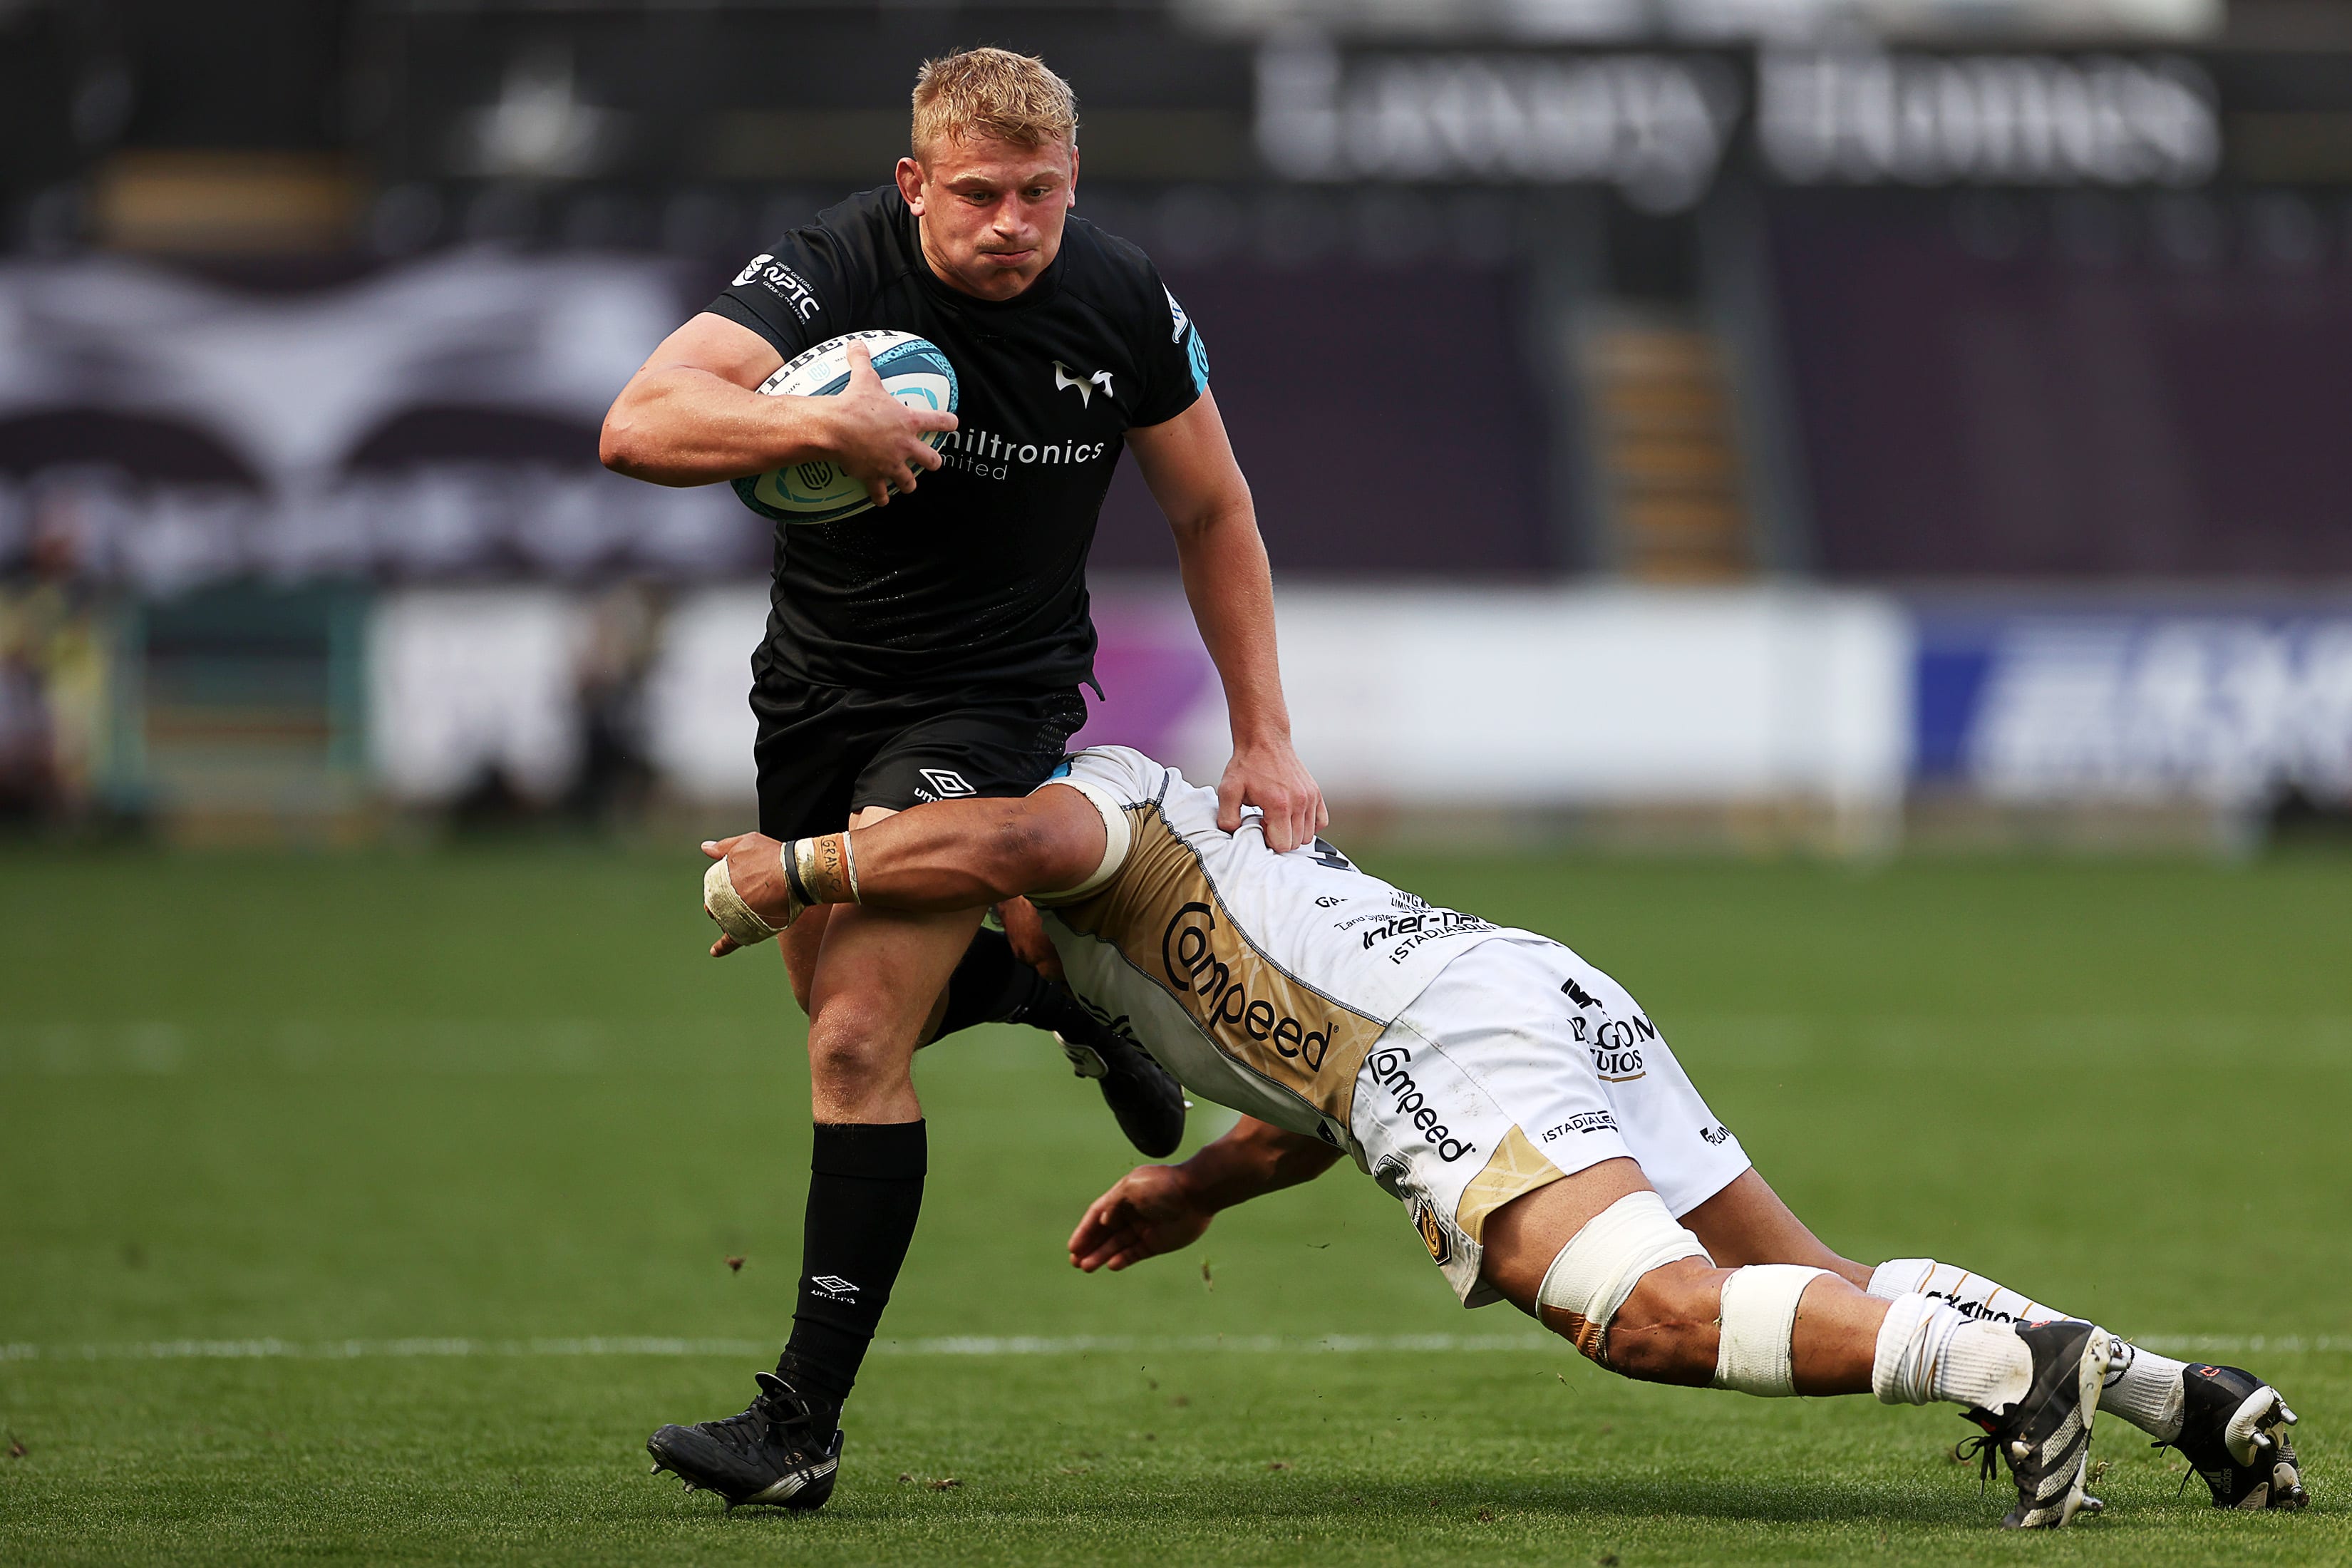 Ospreys player shrugs off a tackle